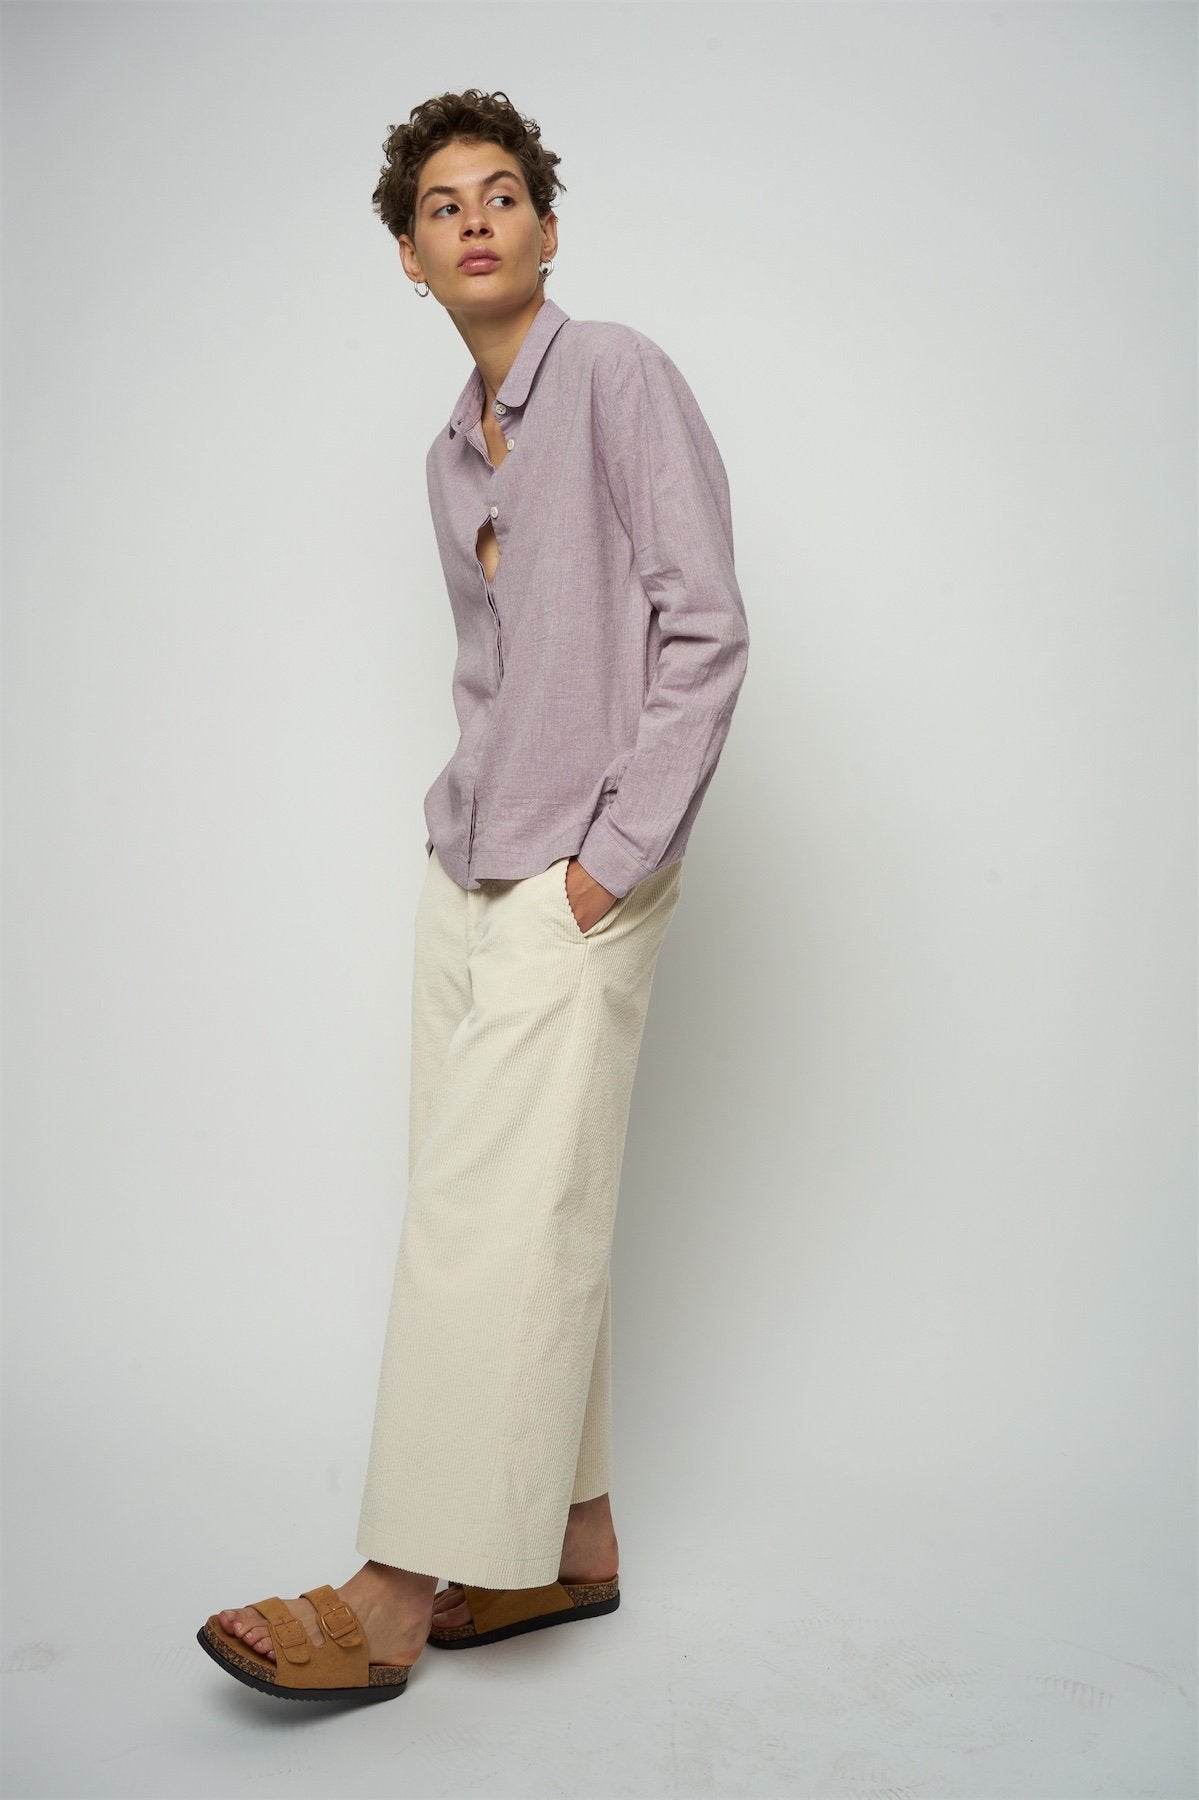 Cute Round Collar Shirt in a Purple Heather Grey Japanese Organic Cotton and Linen